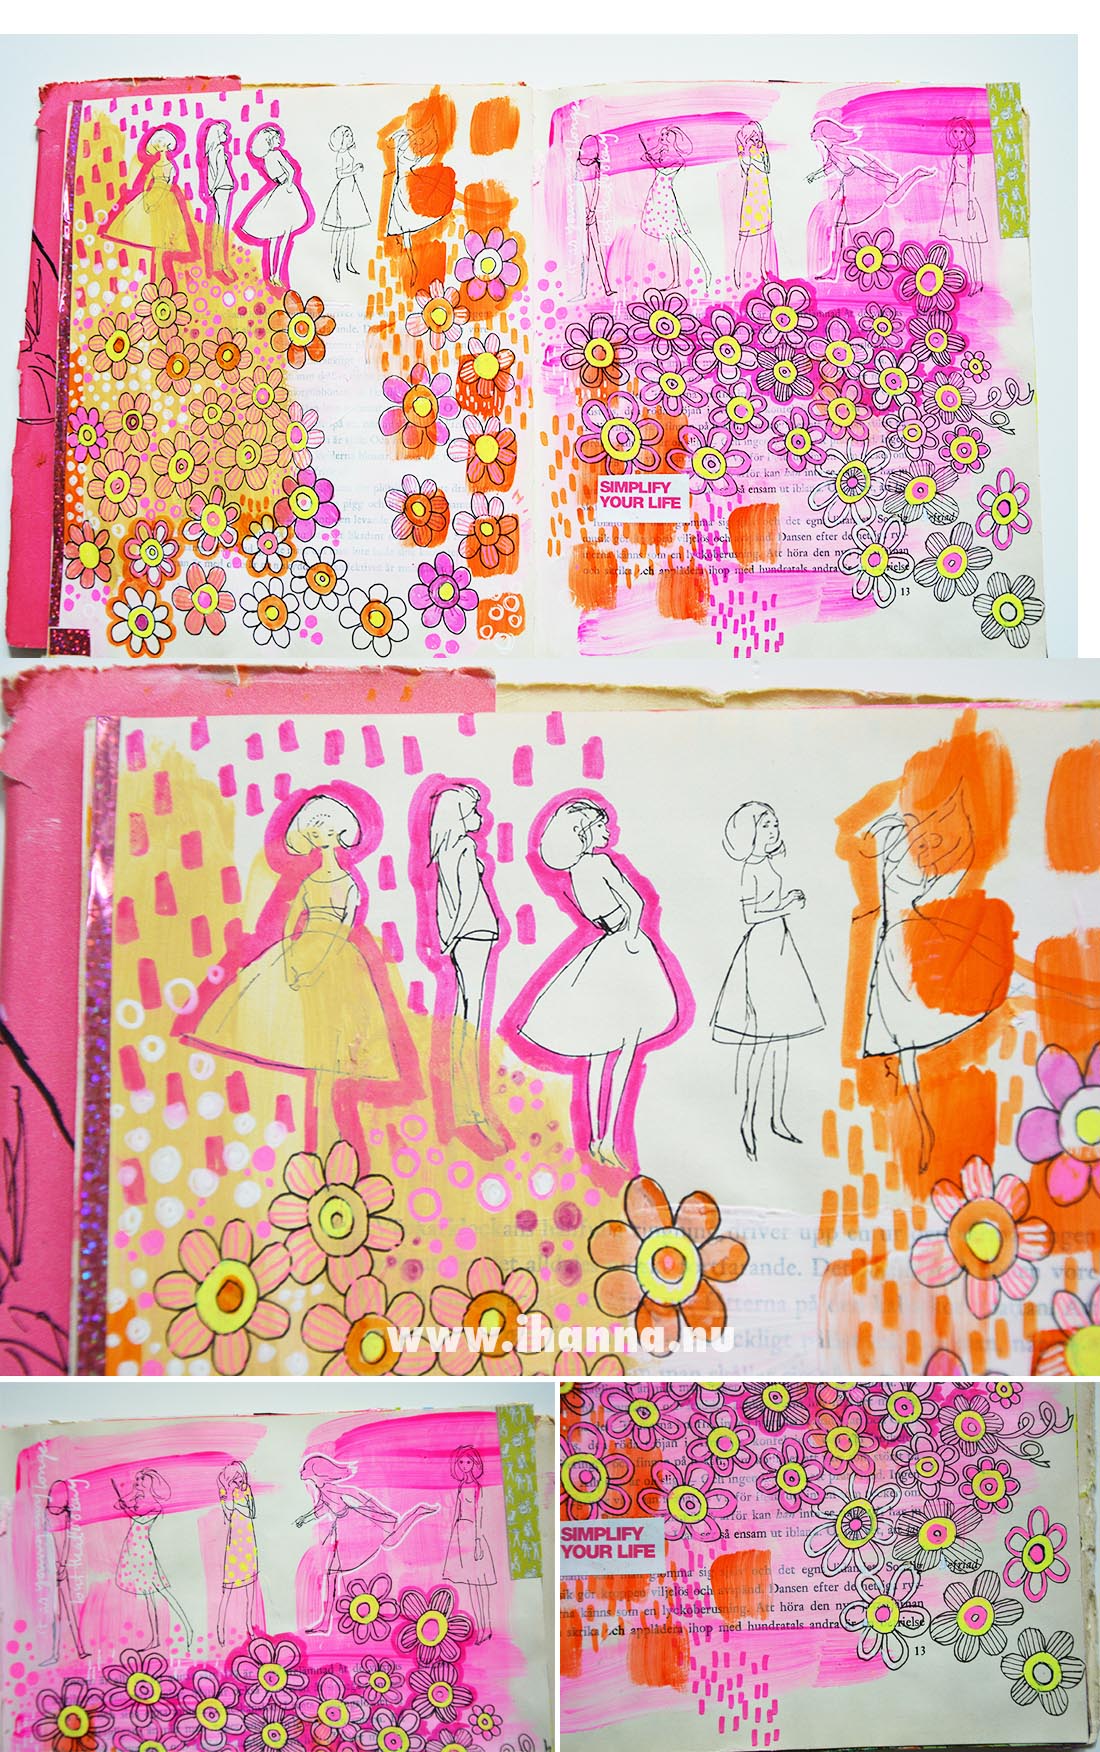 Simplify your life art journal page by iHanna